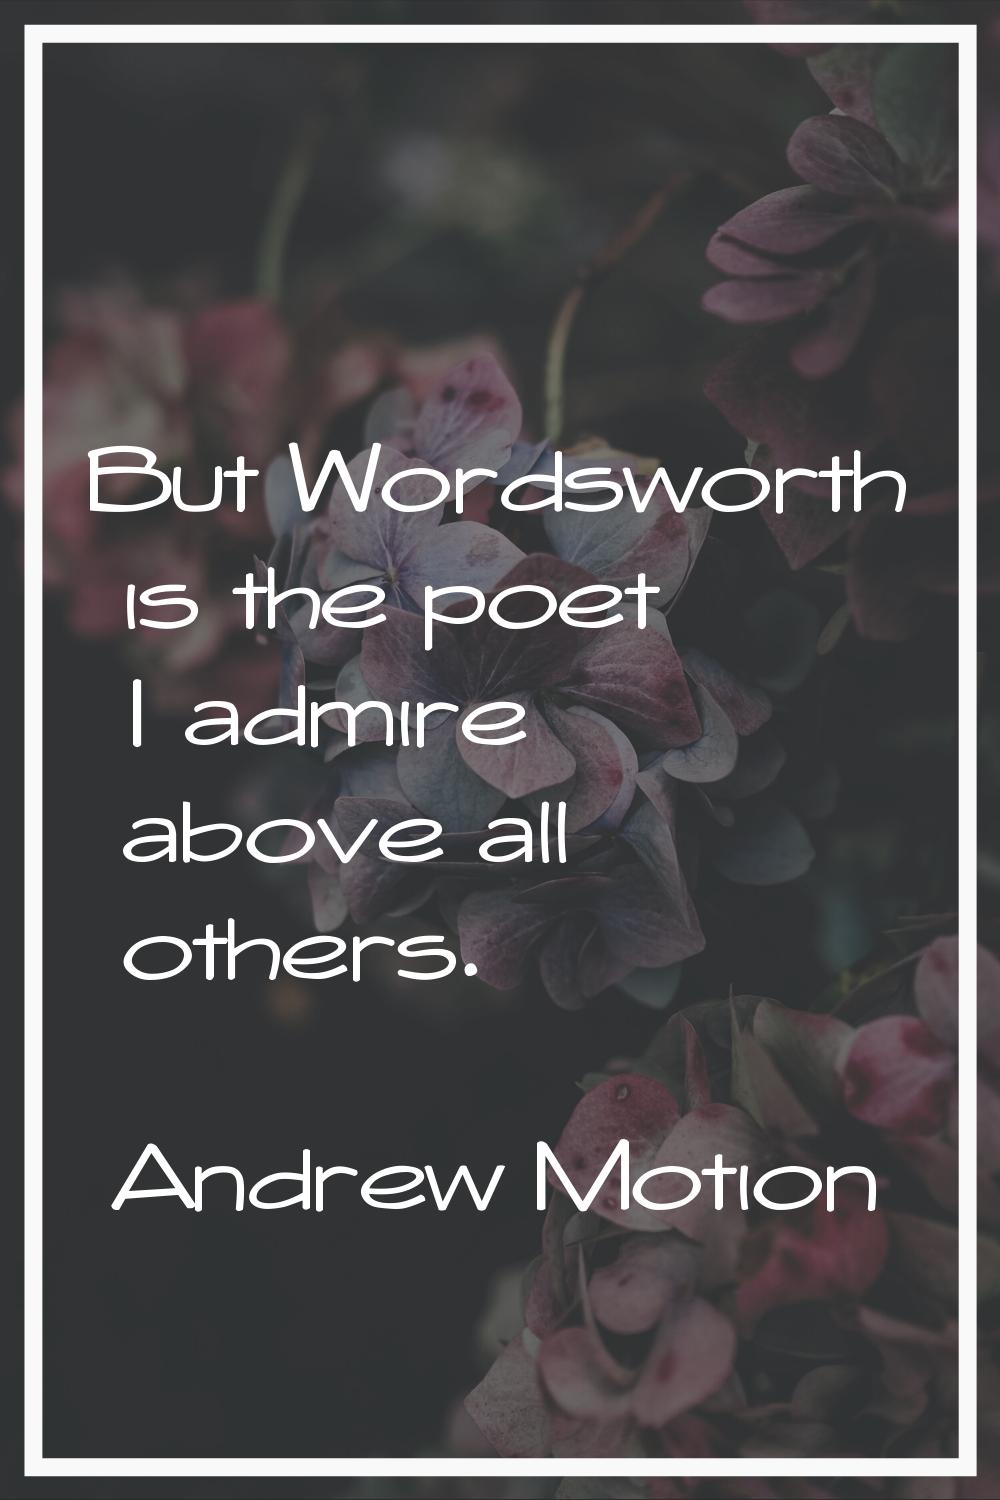 But Wordsworth is the poet I admire above all others.